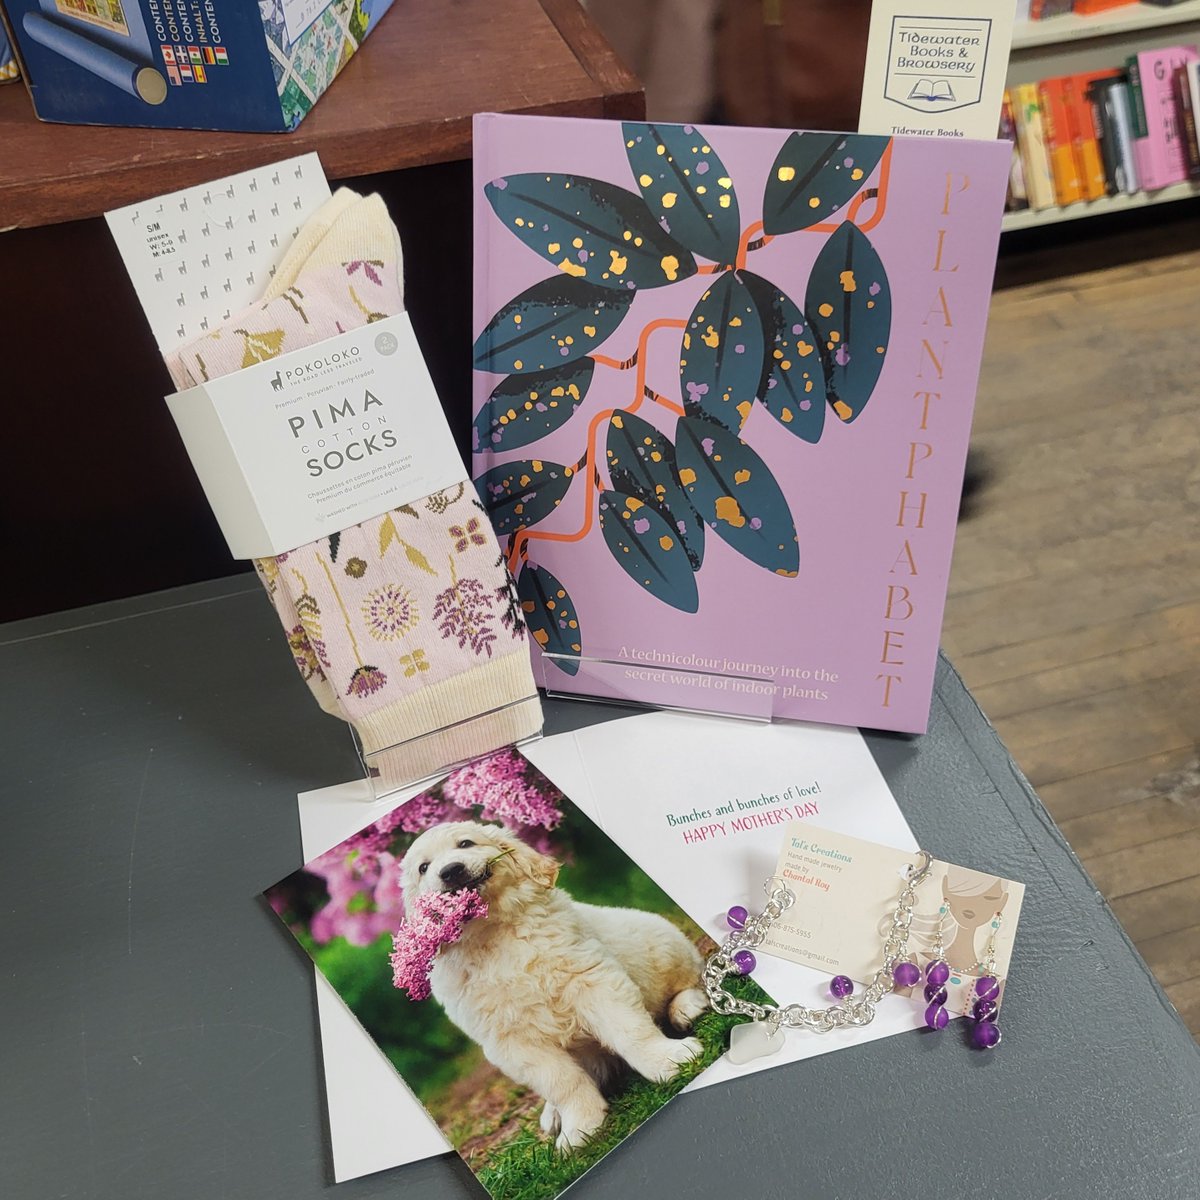 Moms to all, pet & plants too!!

Books, pima socks, local jewelry, & so much more for Mom in-store!

Visit us in person or online at tidewaterbooks.ca! 💕🇨🇦📚

#ShopSmall #ShopLocal #ShopNB #ShopIndie #ThinkIndie #BookLovers #IndieBookstores #SackvilleNB #GiveABook